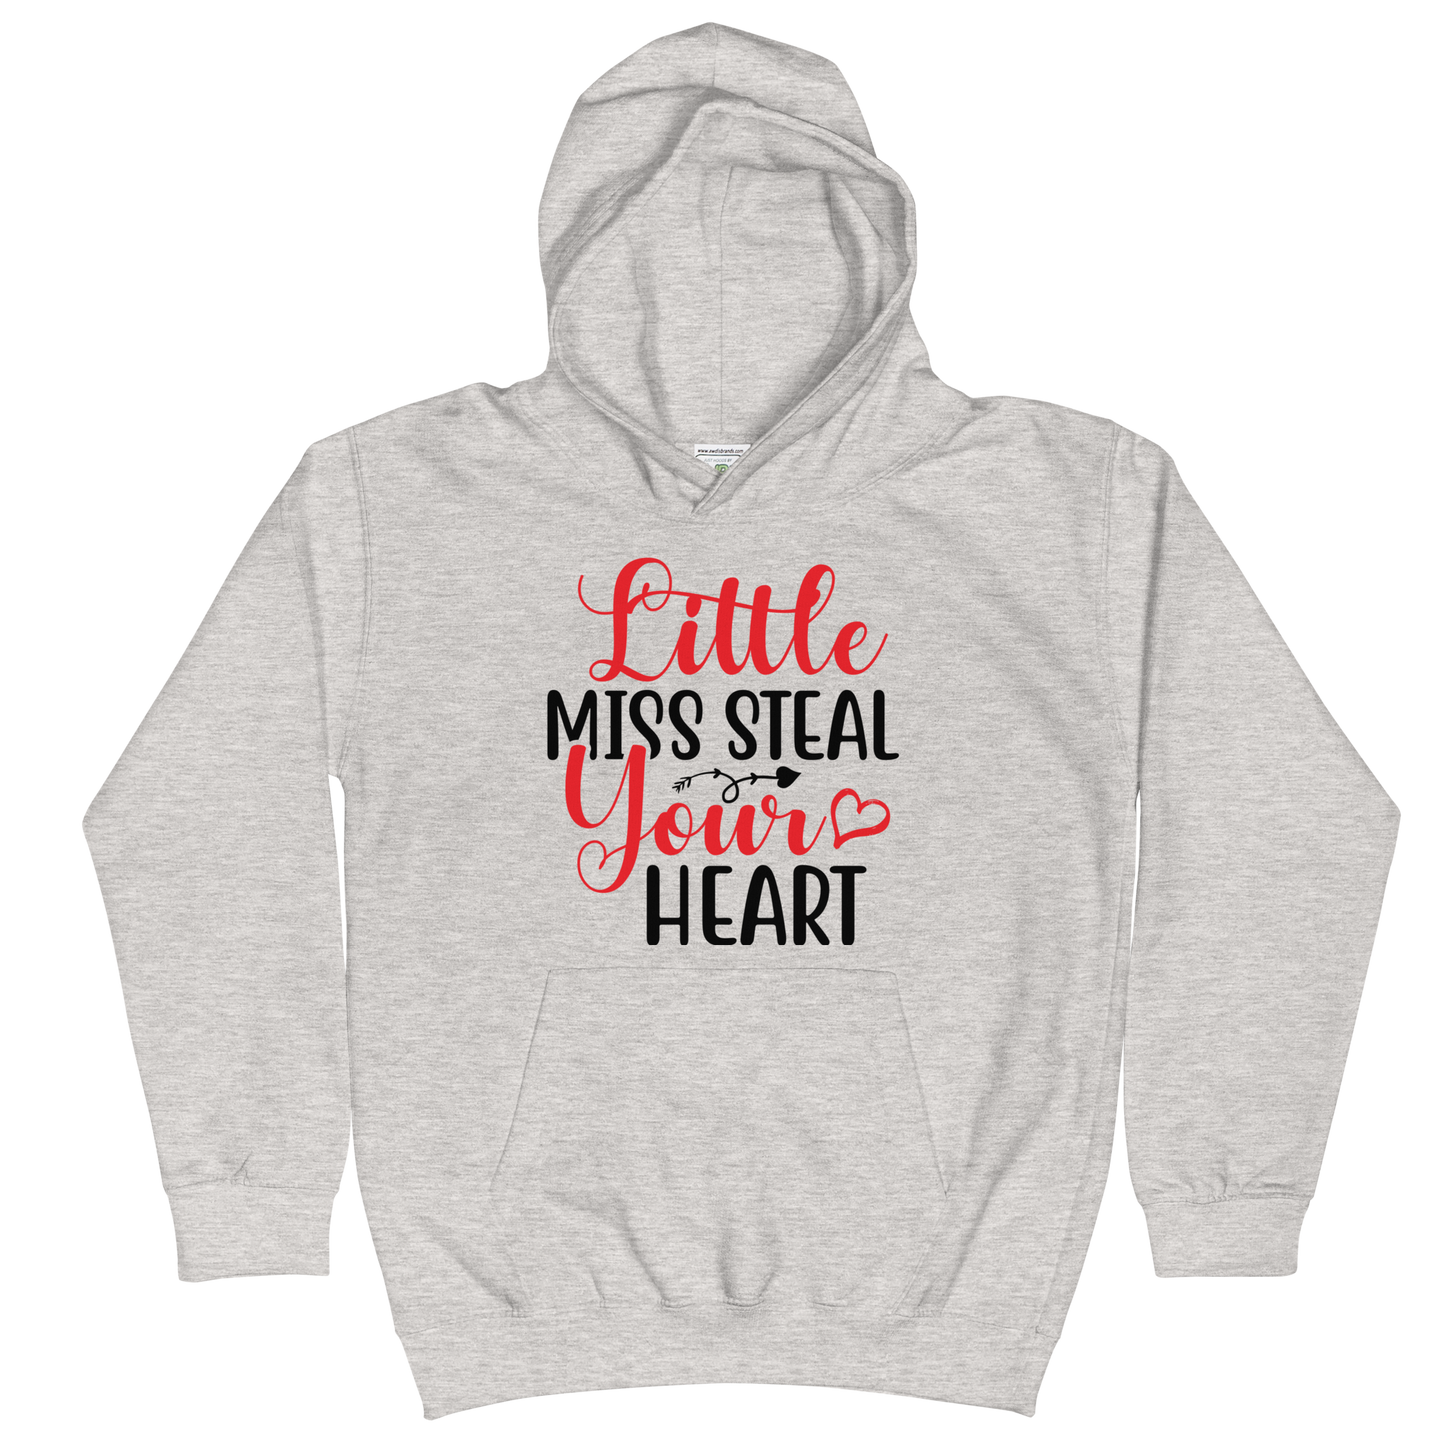 Little Miss. Steal Your Heart Kids Hoodie